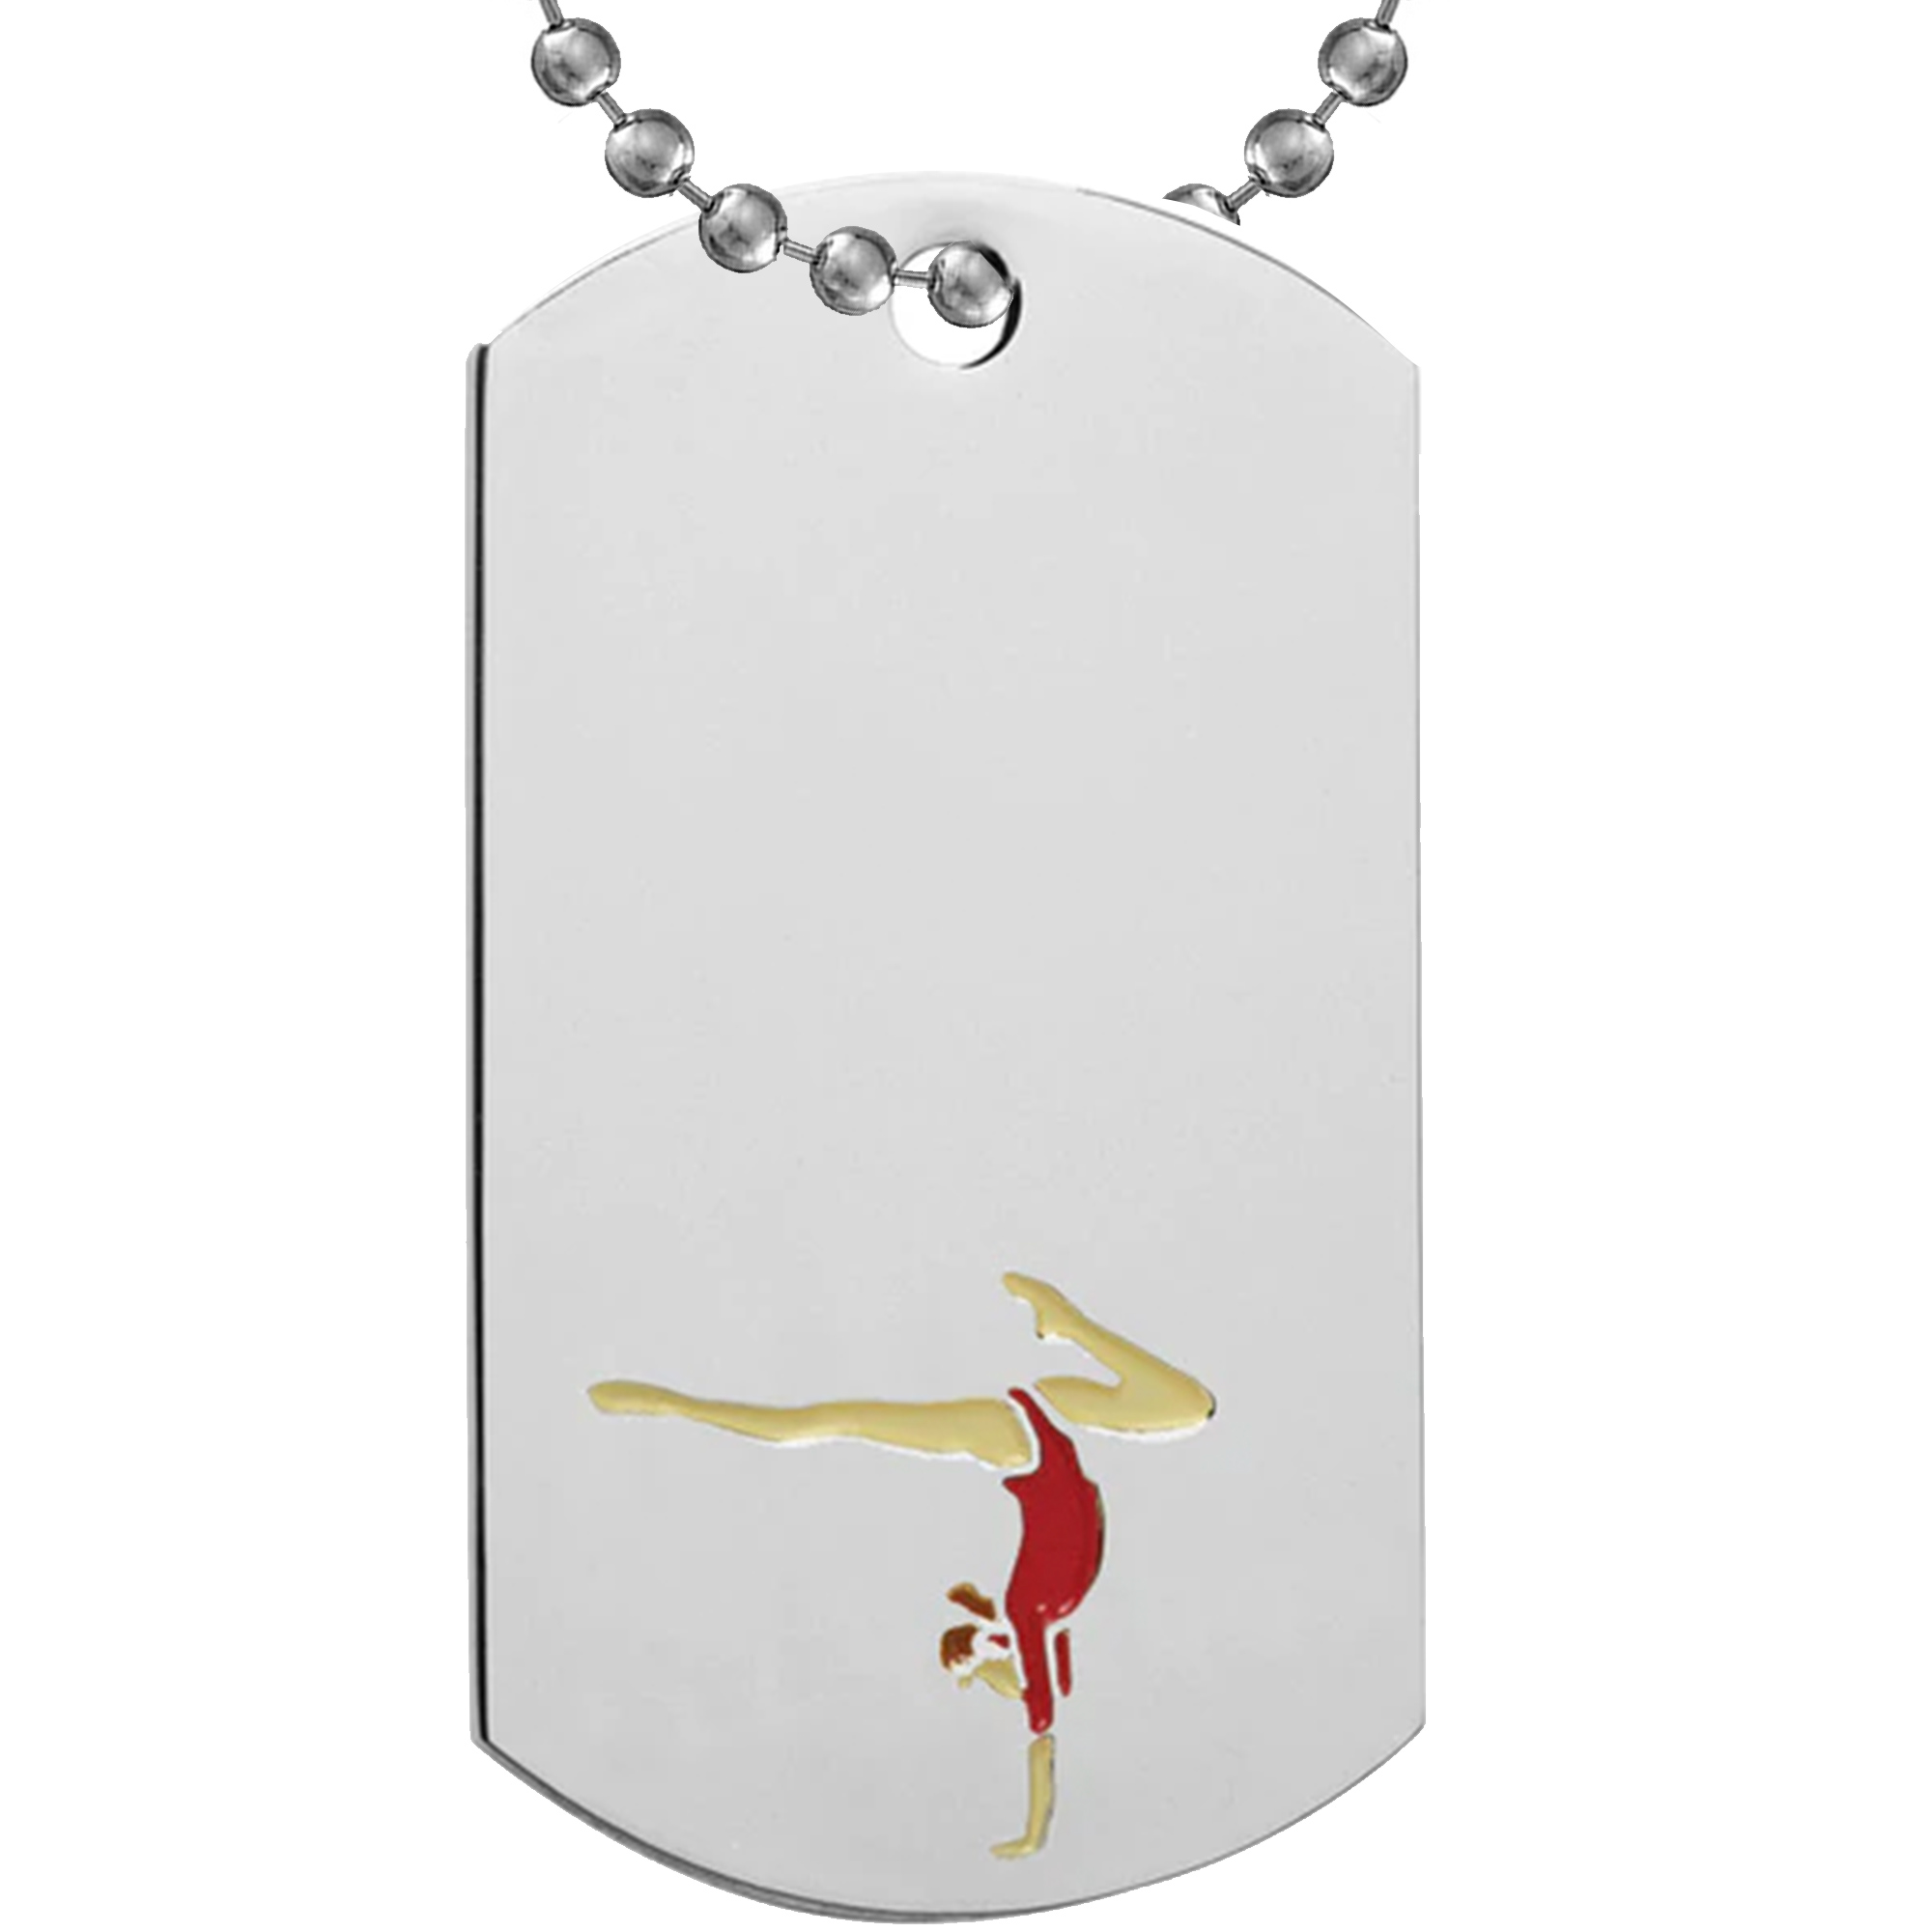 Gymnastics Etched & Paint Filled Dog Tag